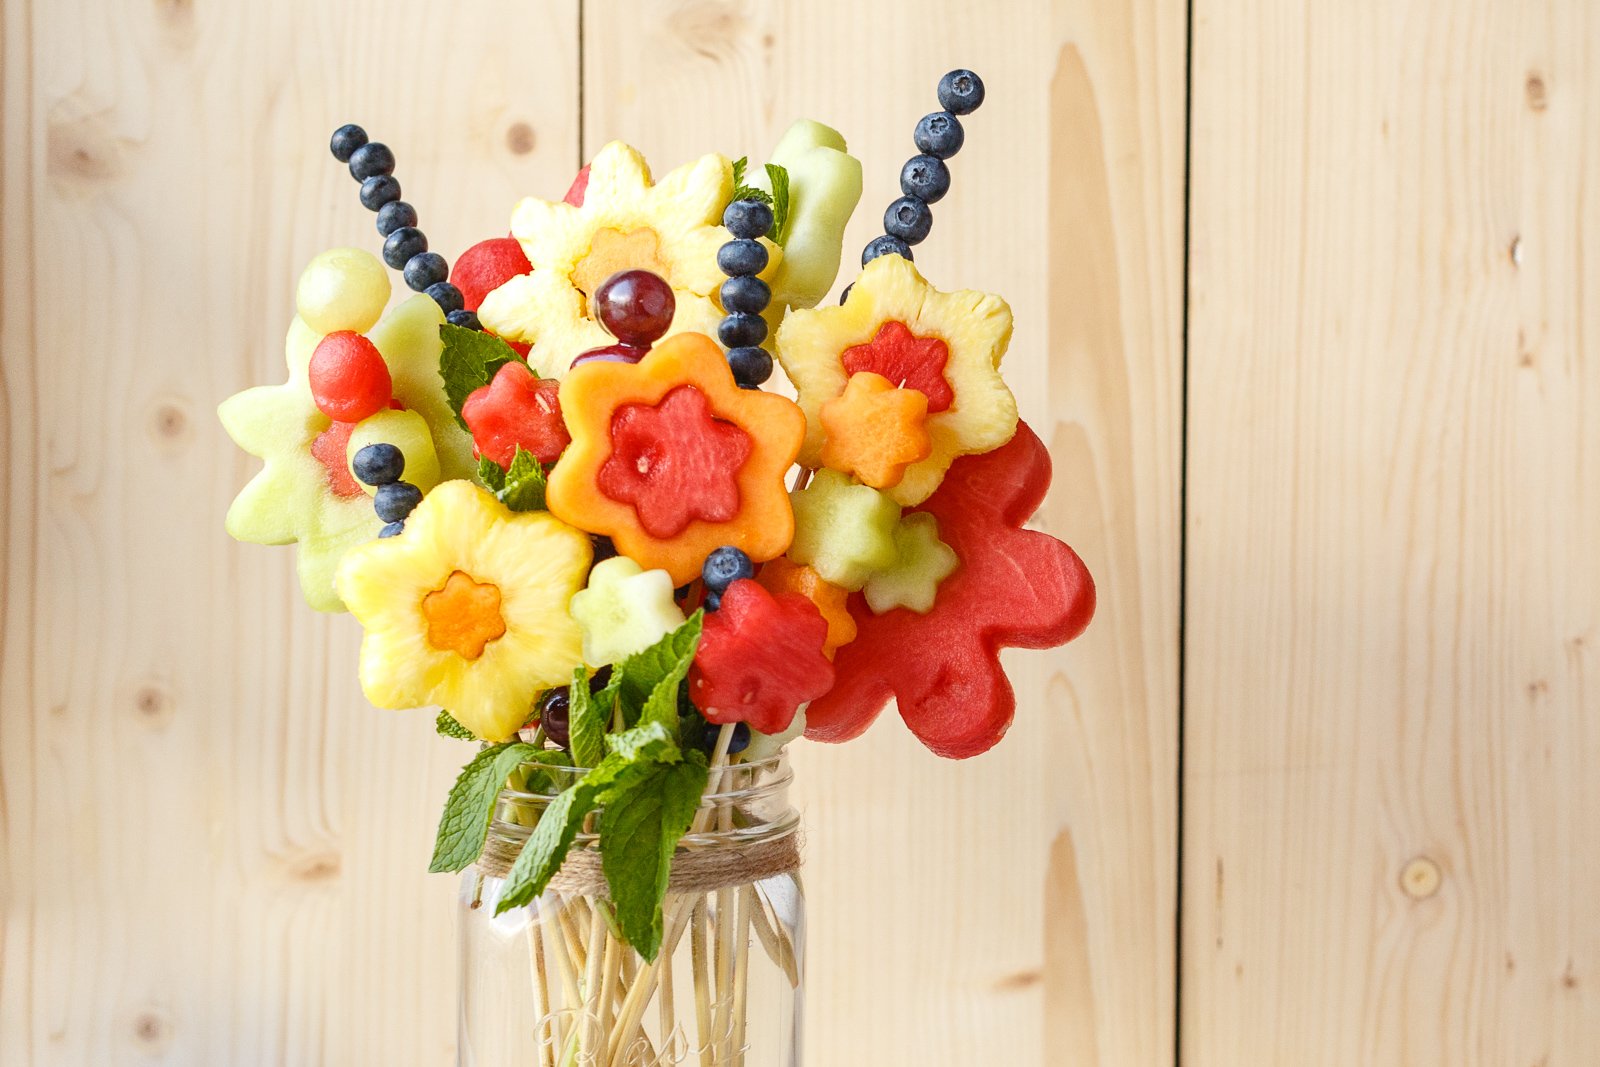 How to Make an Edible Bouquet - Super Healthy Kids